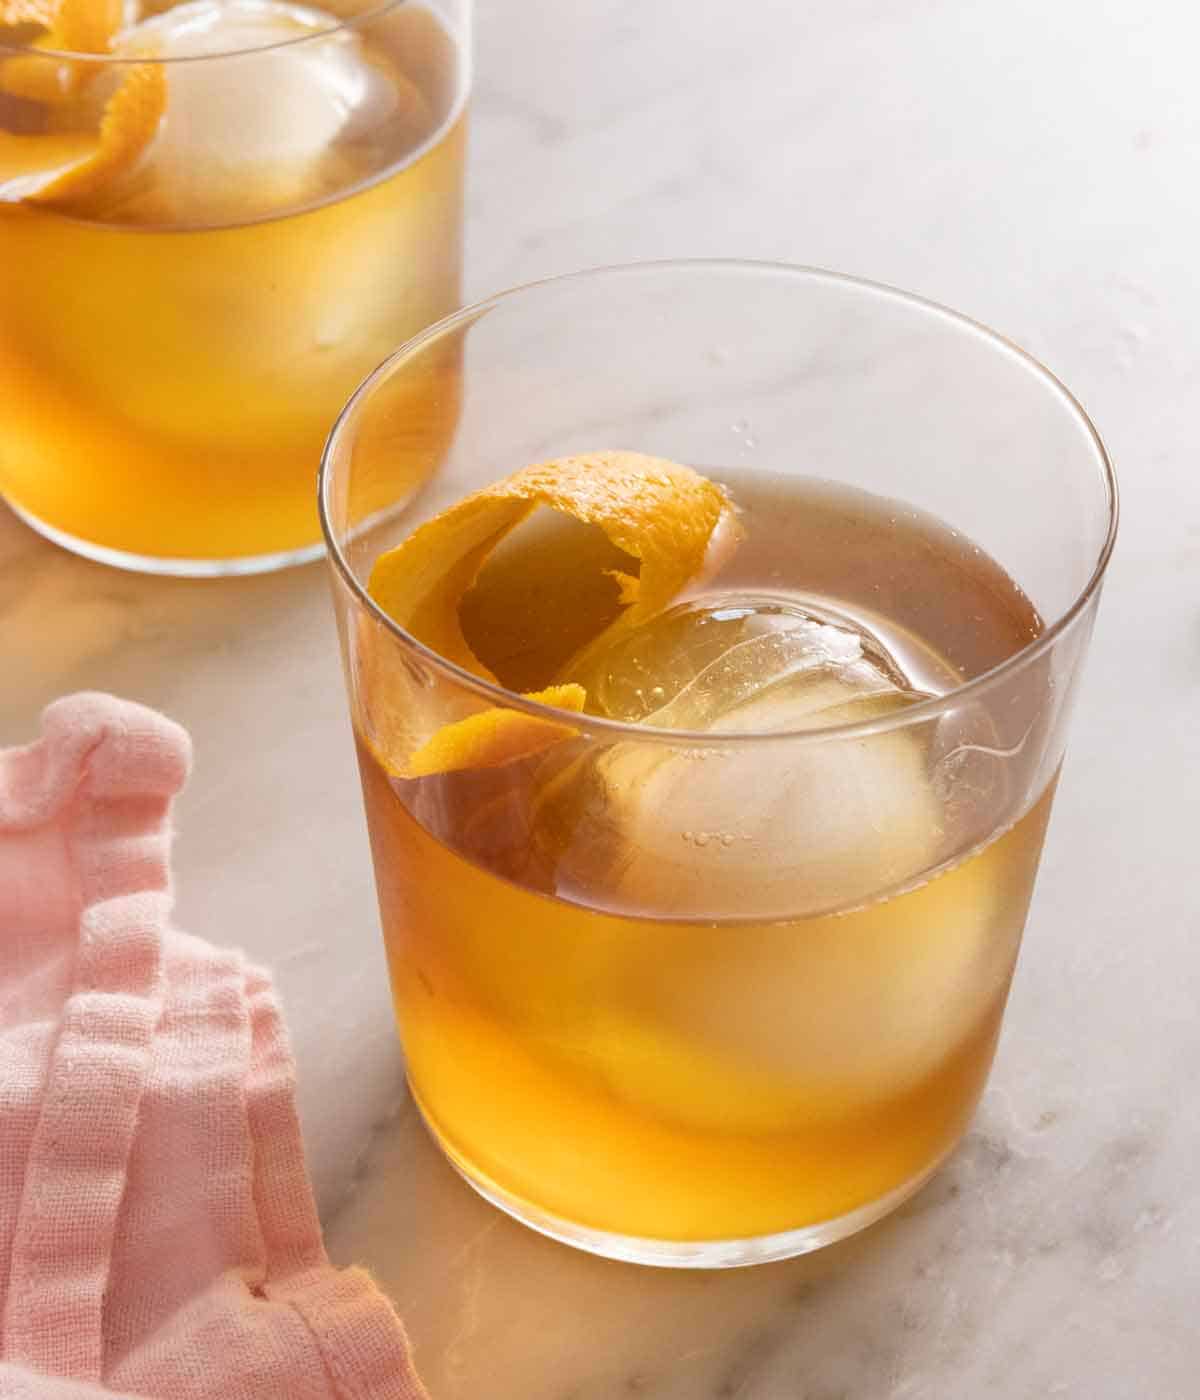 A glass of old fashioned with a circular ice cube and orange peel inside. A second drink in the background.